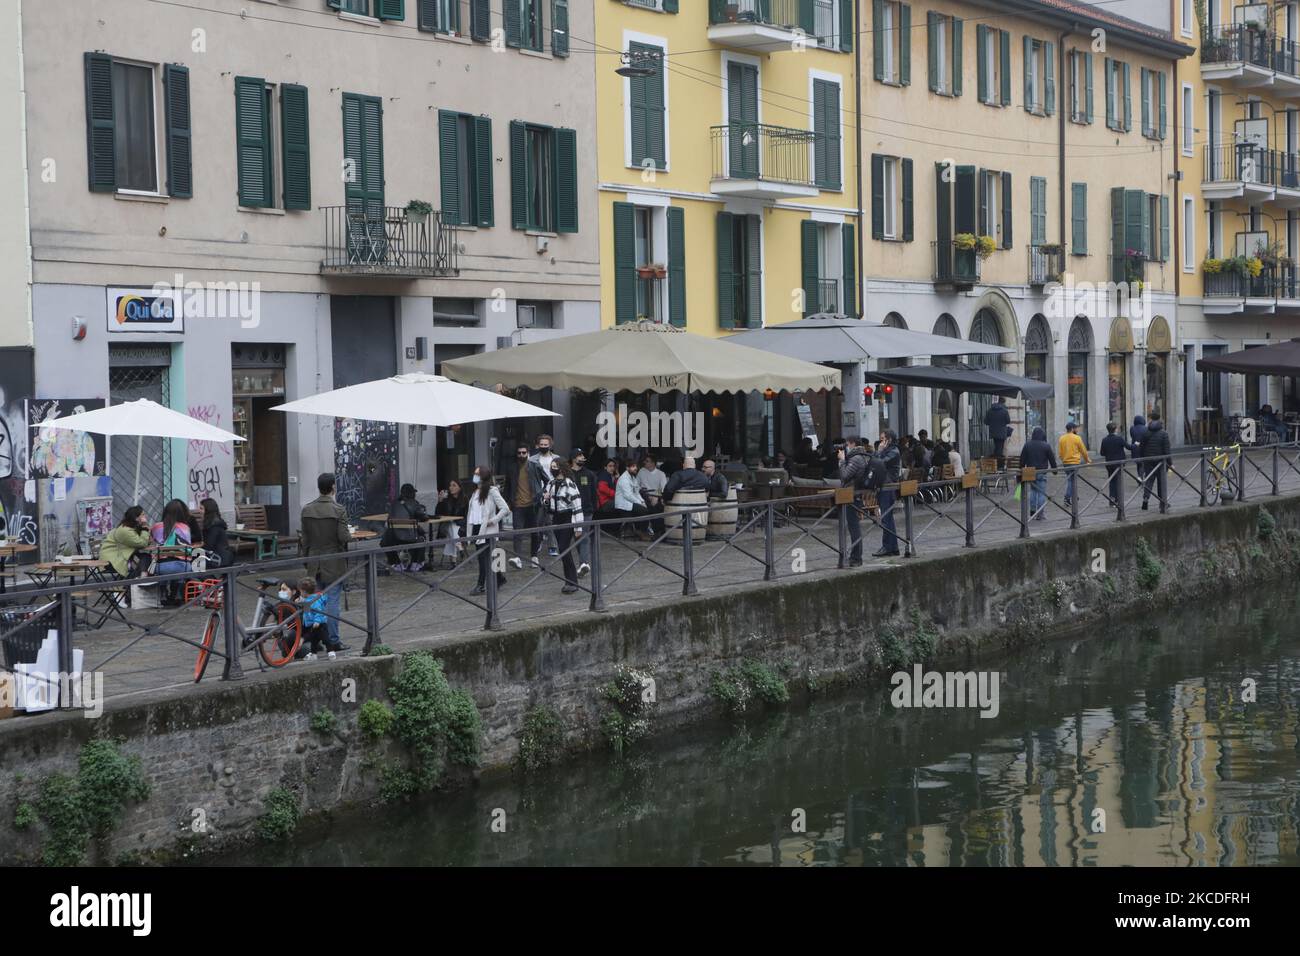 People have a drink on a bar terrace at the Navigli in downtown Milan, Italy on April 26, 2021 as bars, restaurants, cinemas and concert halls partially reopen across Italy in a boost for coronavirus-hit businesses, as parliament debates the government's 220-billion-euro ($266-billion) EU-funded recovery plan. - After months of stop-start restrictions imposed to manage its second and third waves of Covid-19, Italy hopes this latest easing will mark the start of something like a normal summer. (Photo by Mairo Cinquetti/NurPhoto) Stock Photo